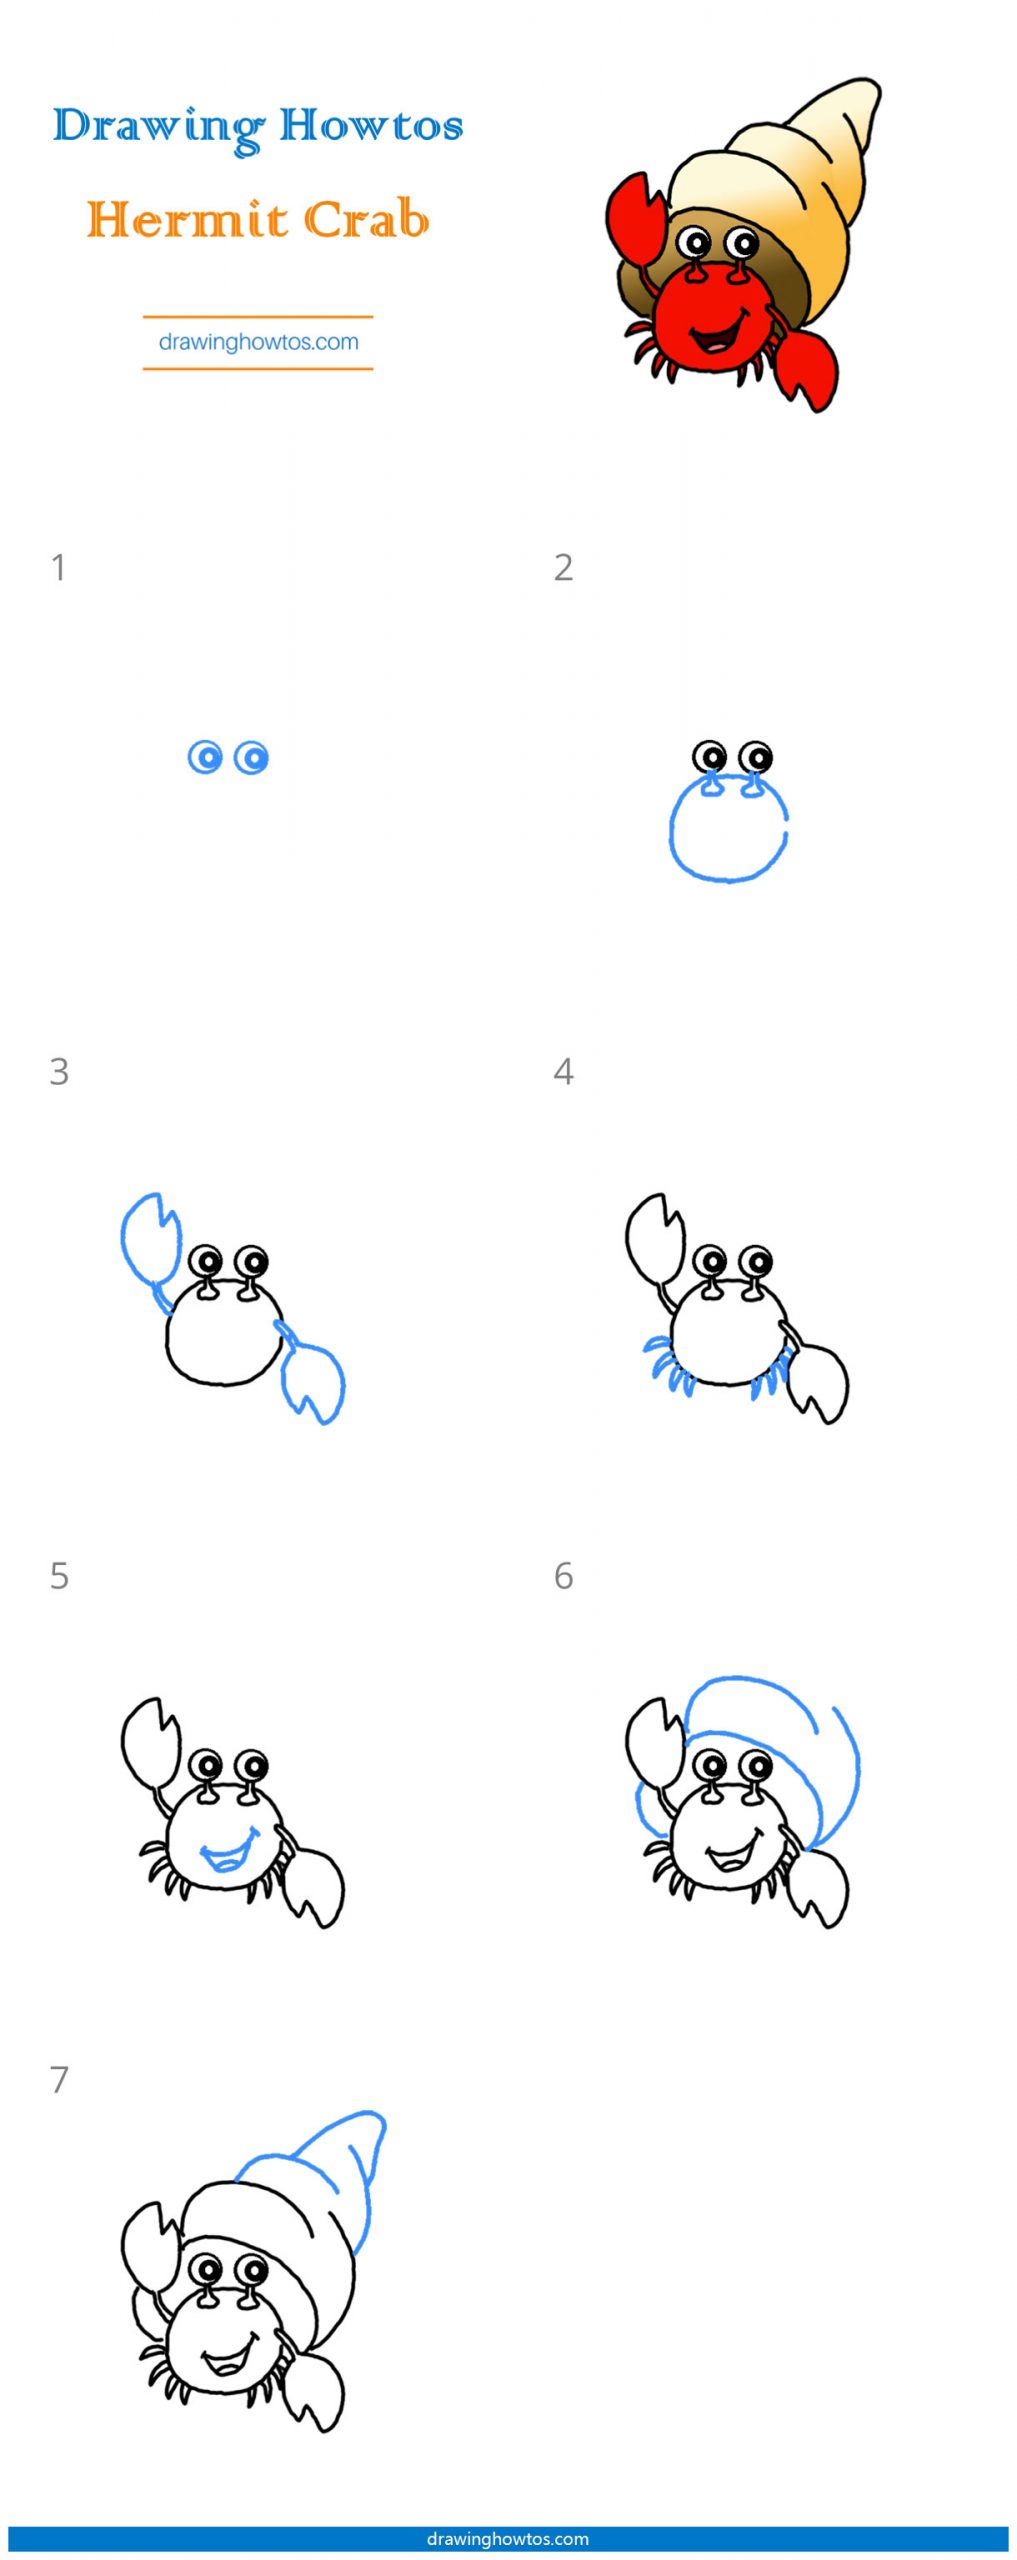 How to Draw a Hermit Crab Step by Step